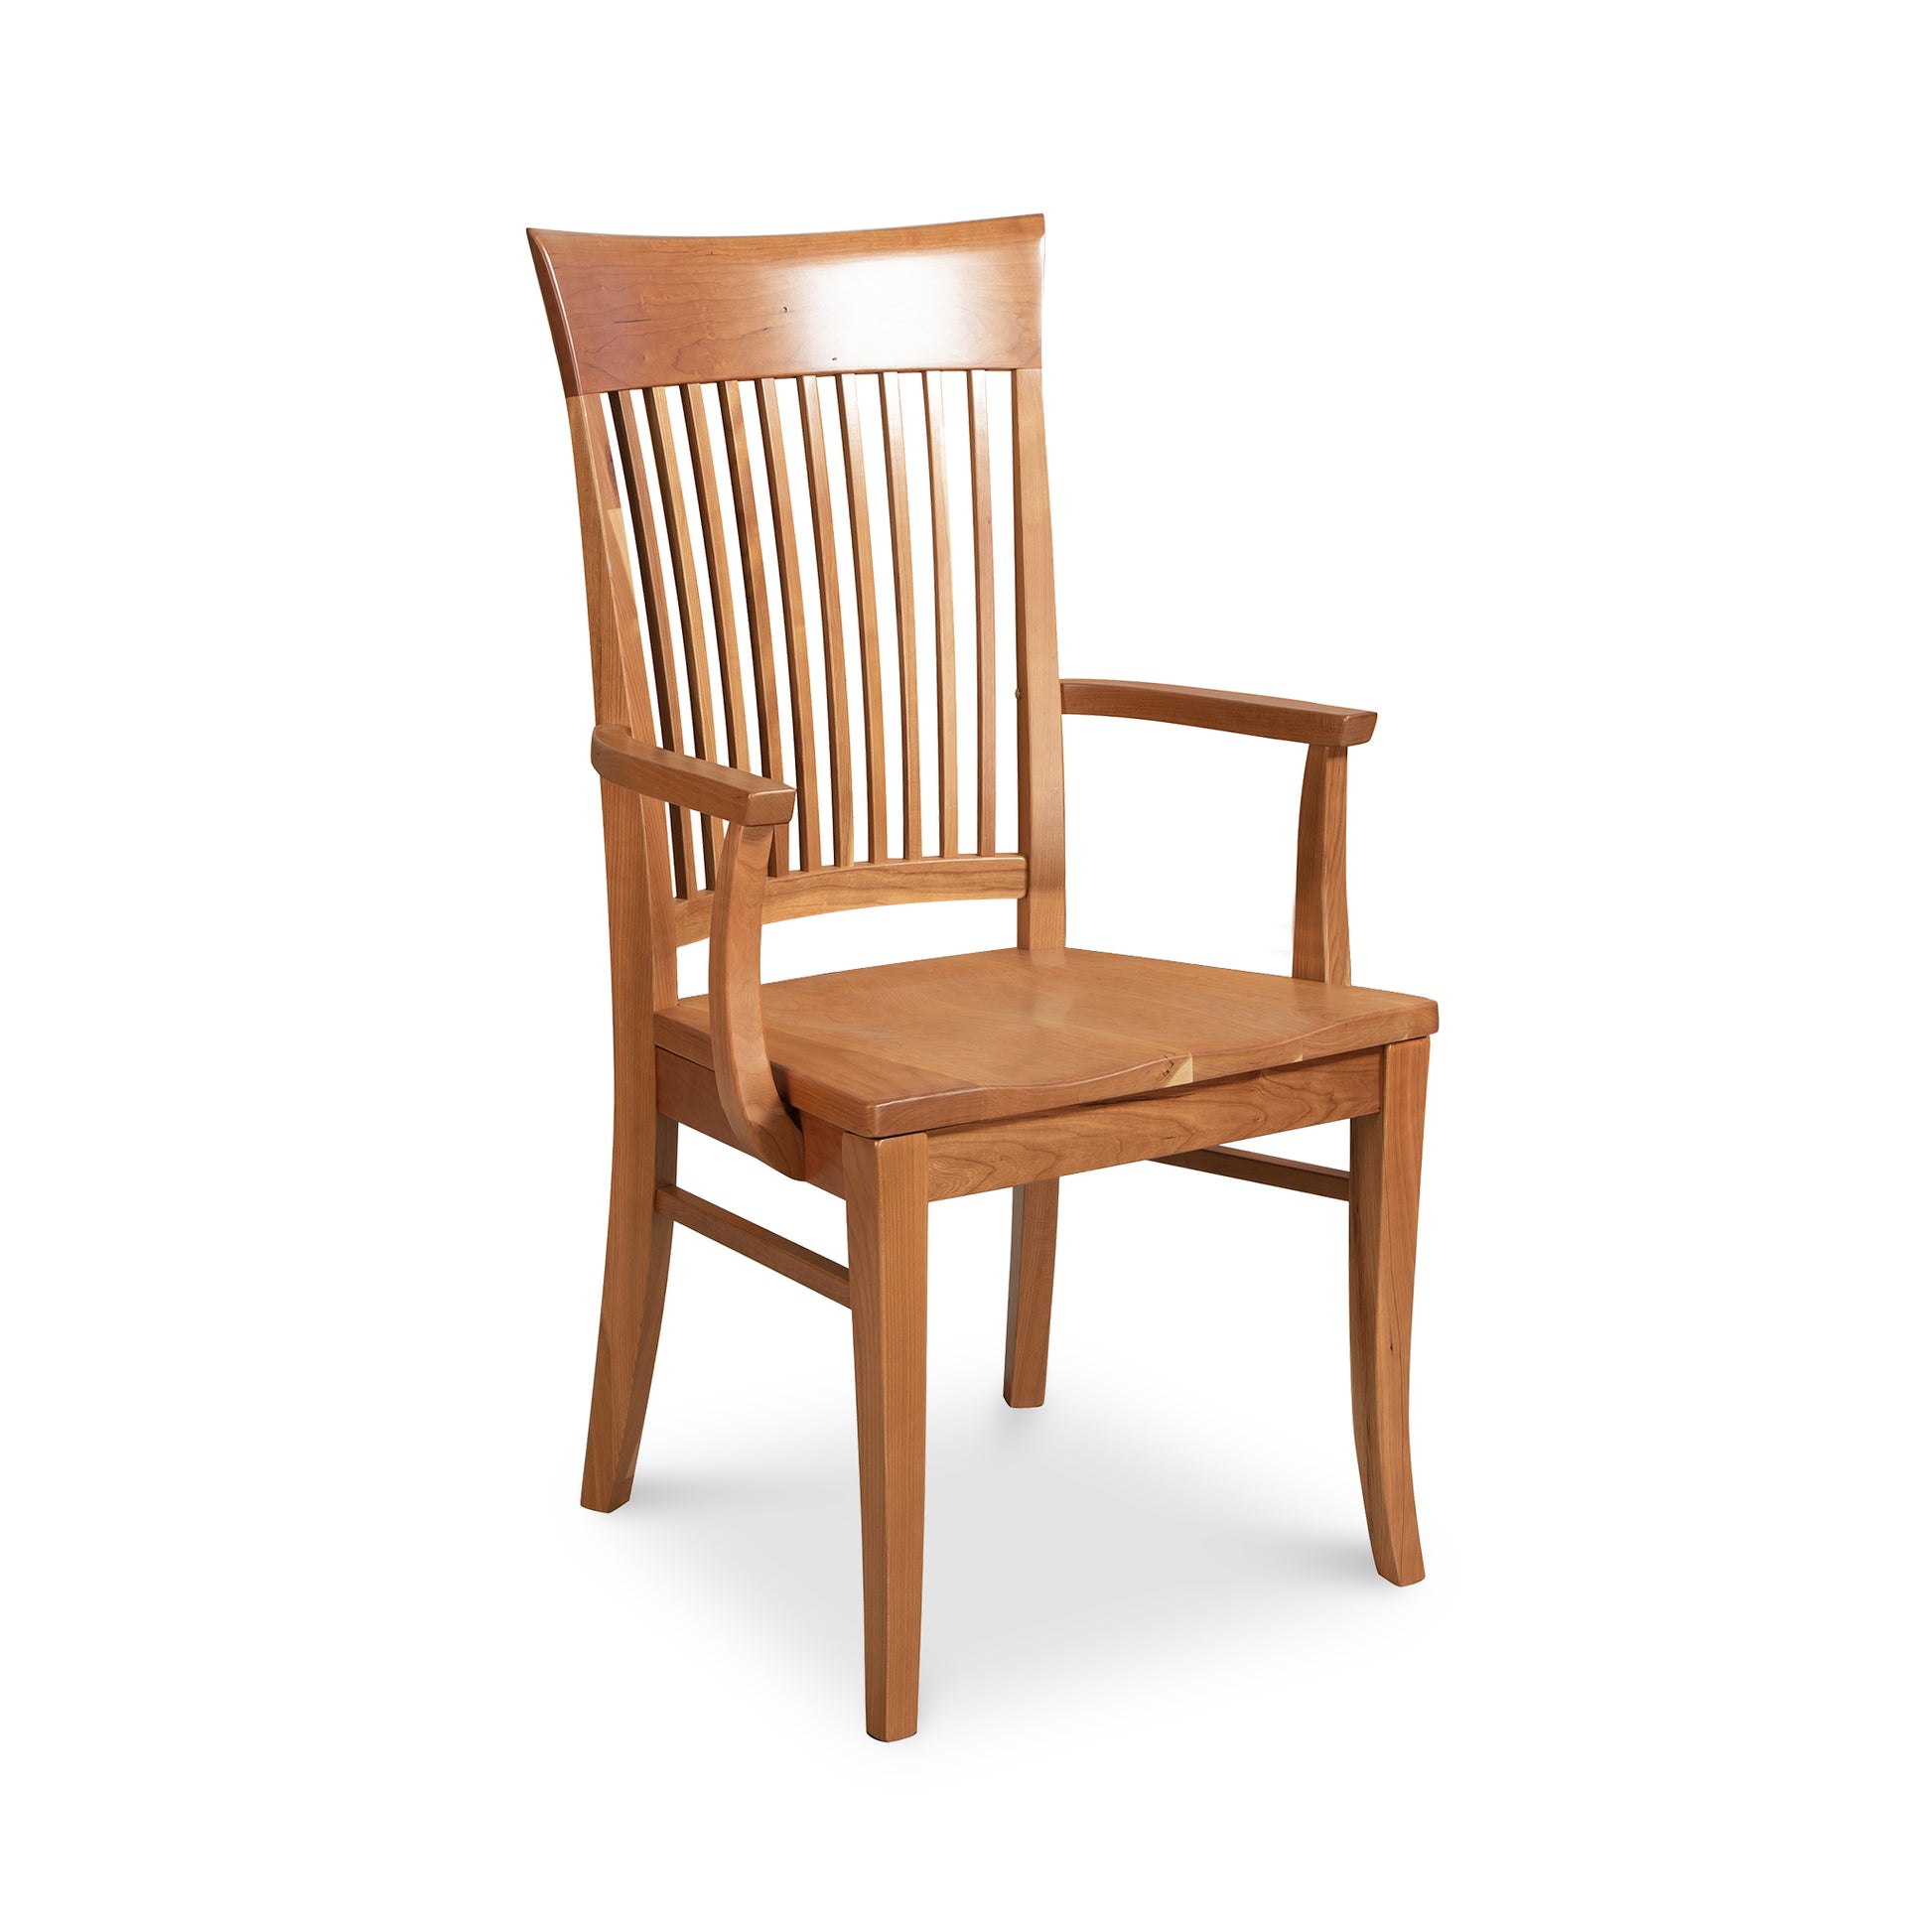 A Vermont Woods Studios contemporary Shaker chair with arms, featuring a tall, slatted back and a scooped wooden seat, isolated on a white background.